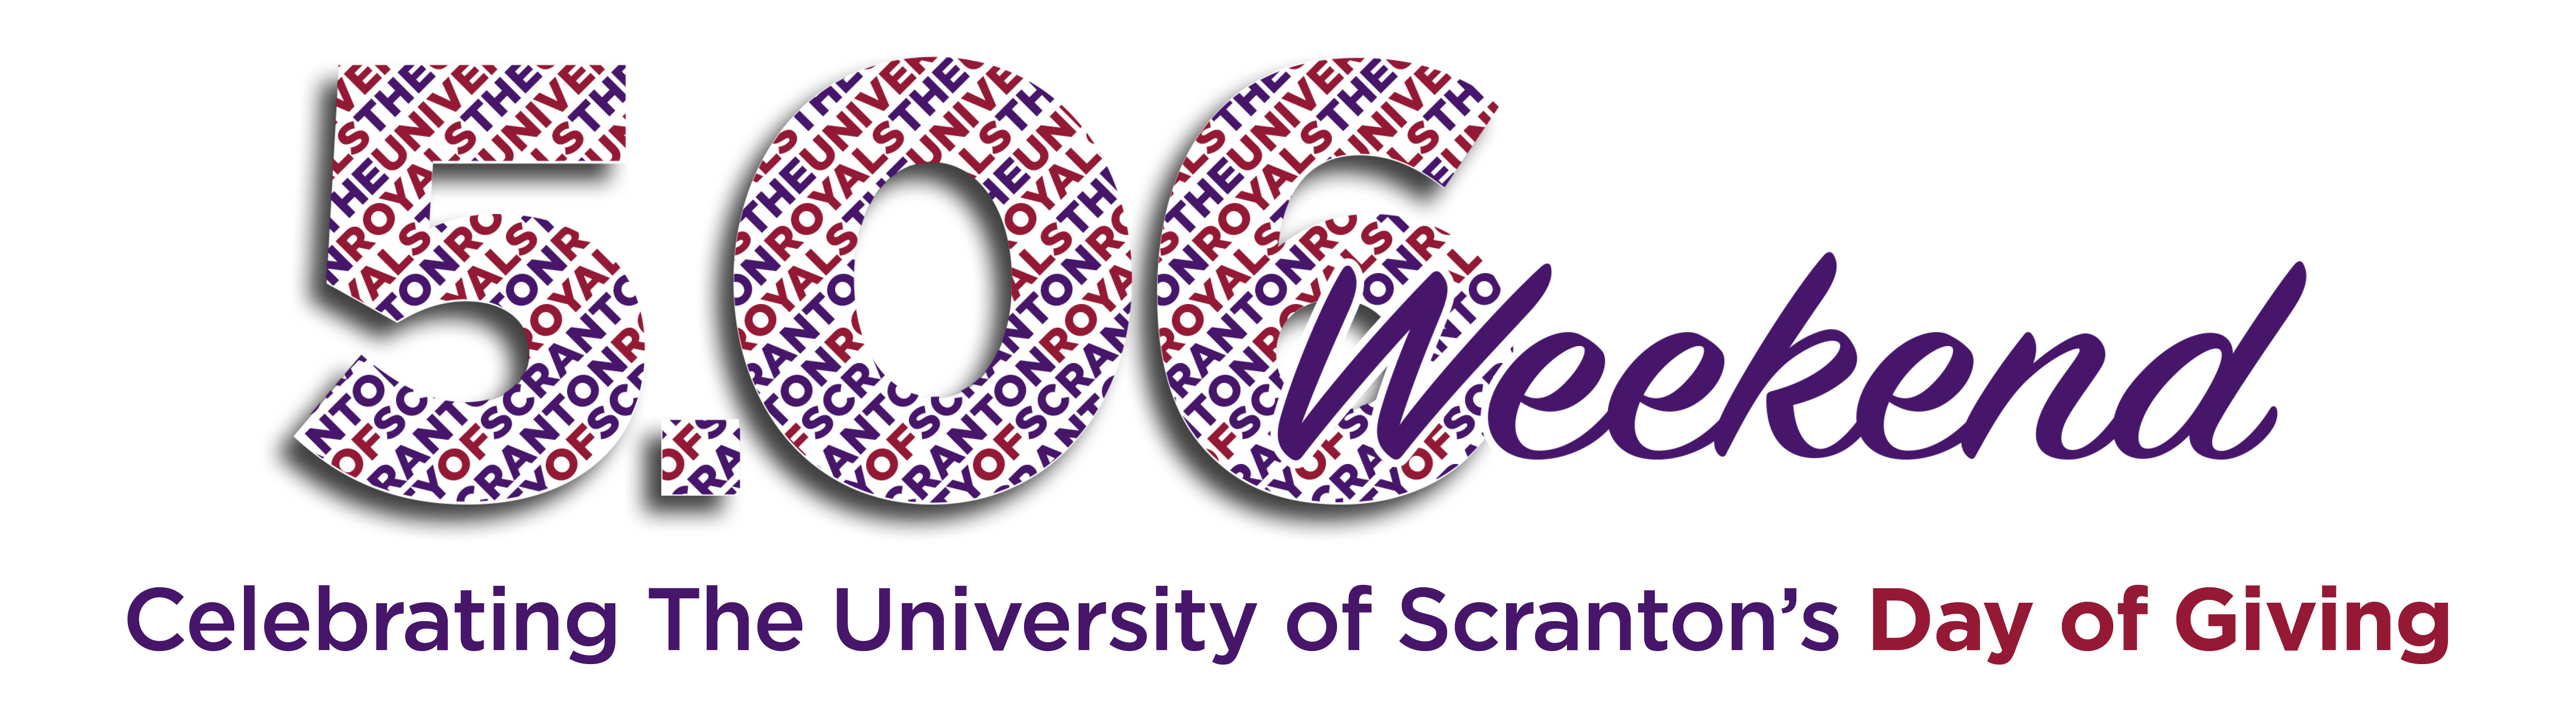 5.06 Weekend: Celebrating The University of Scranton's Day of Giving